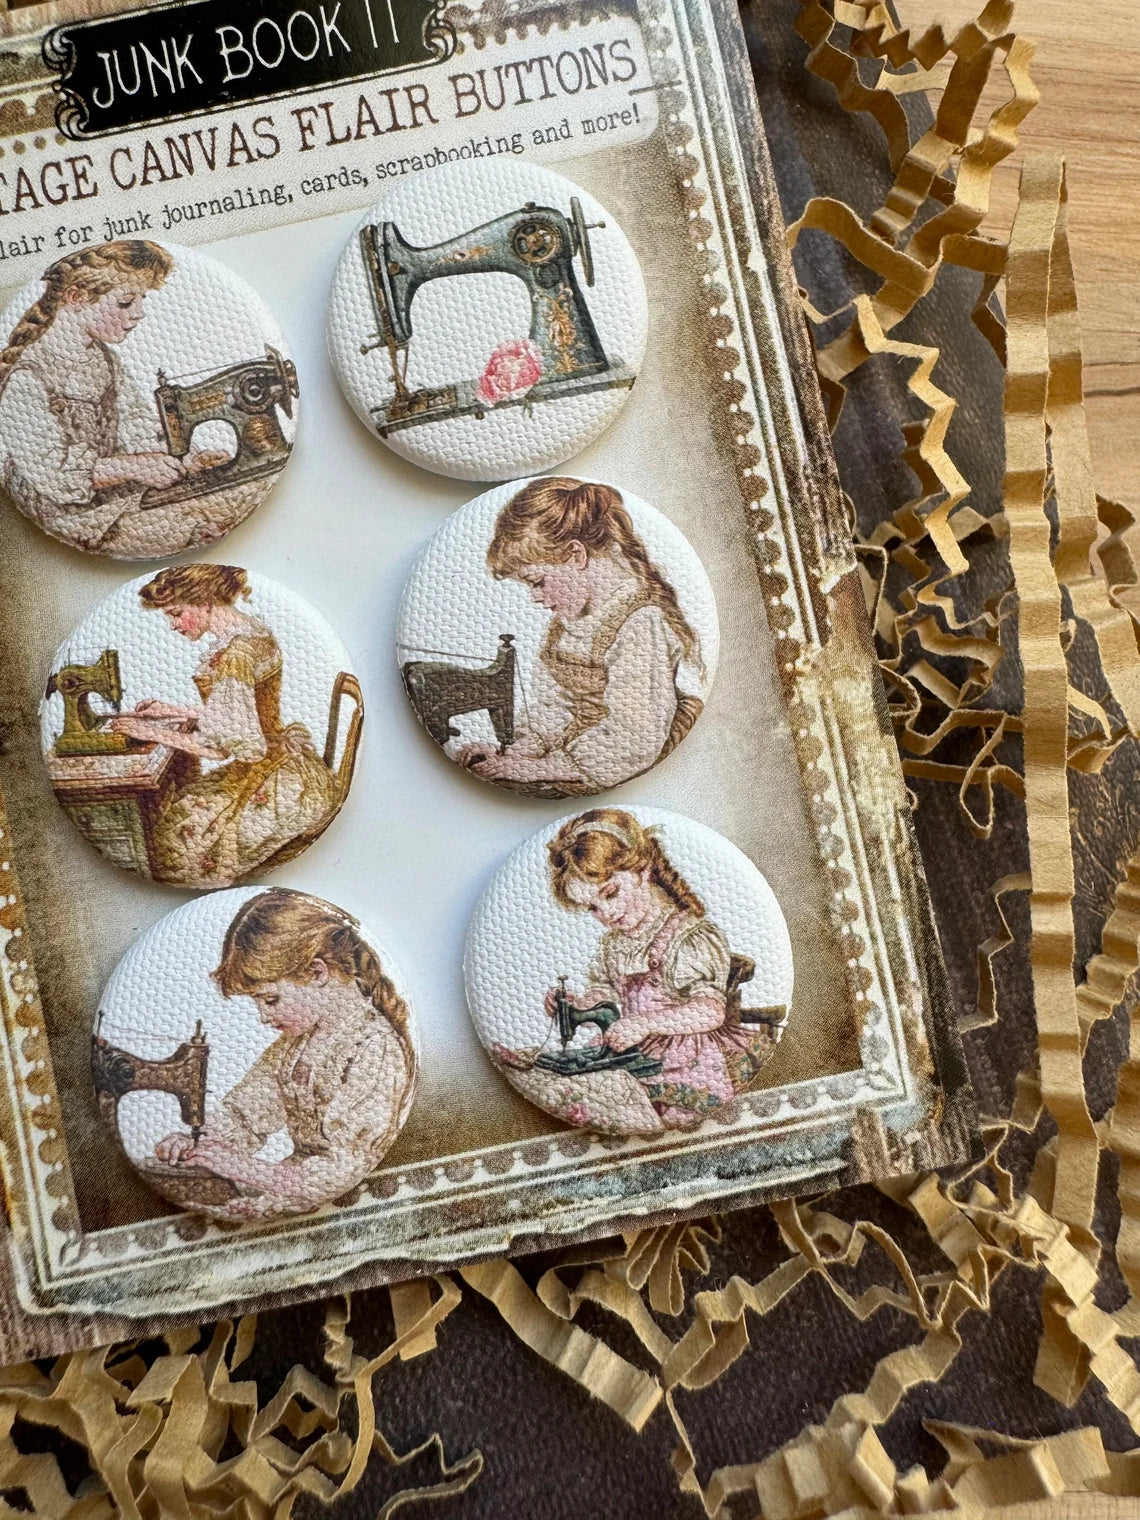 Vintage Sewing Canvas Flair Buttons